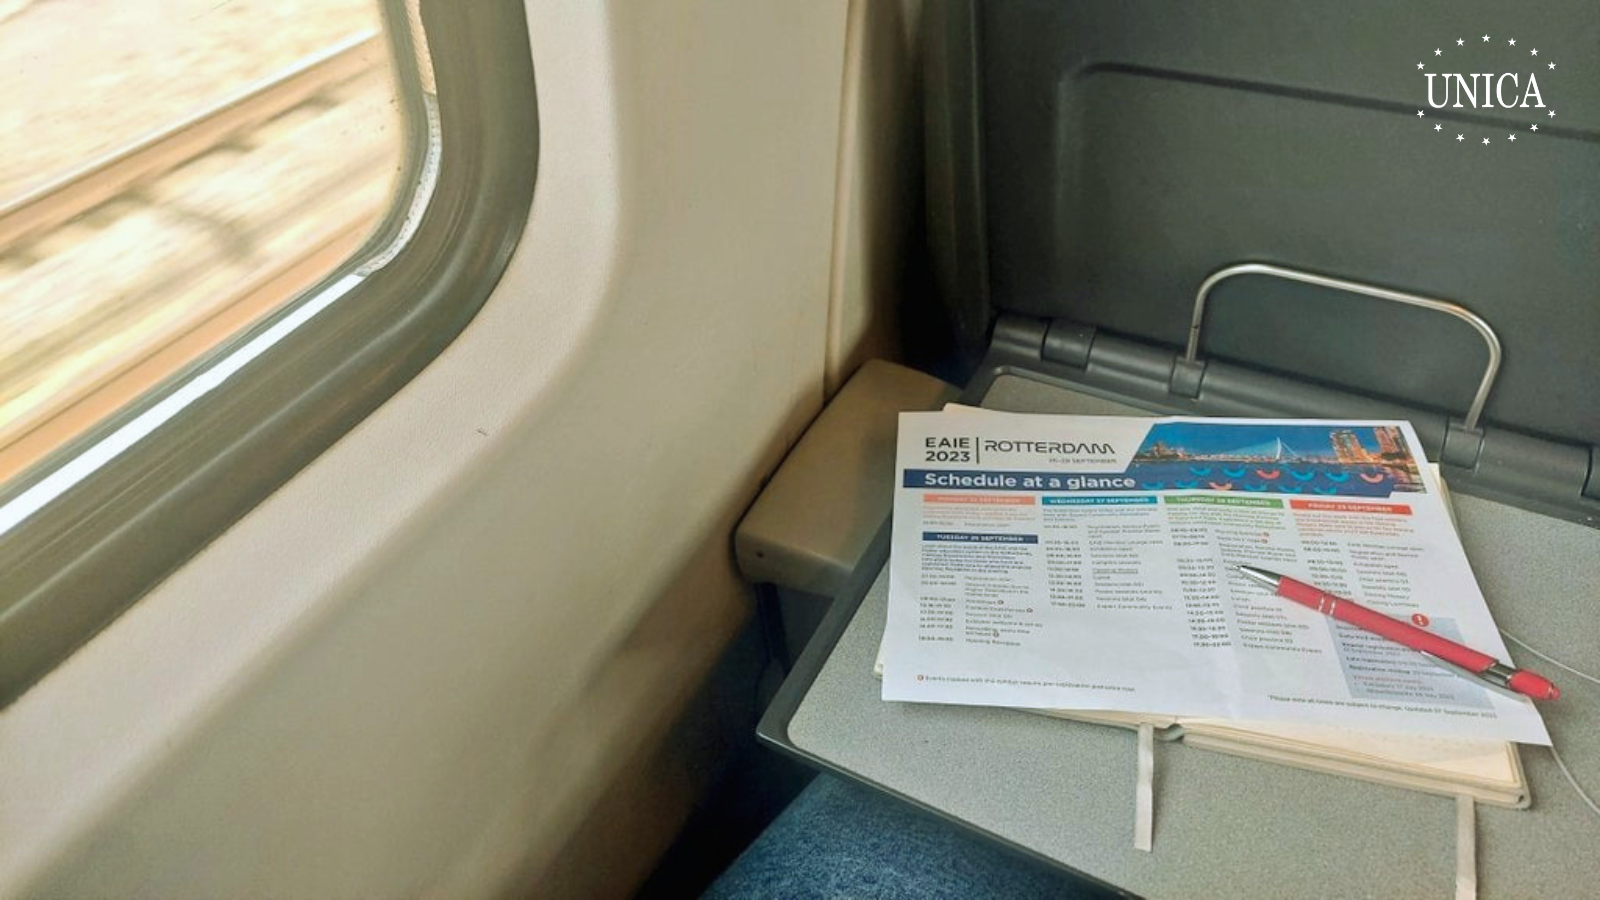 Paper, notebook and pen displayed on a table on a train seat. Snippet of the train's window on the left side